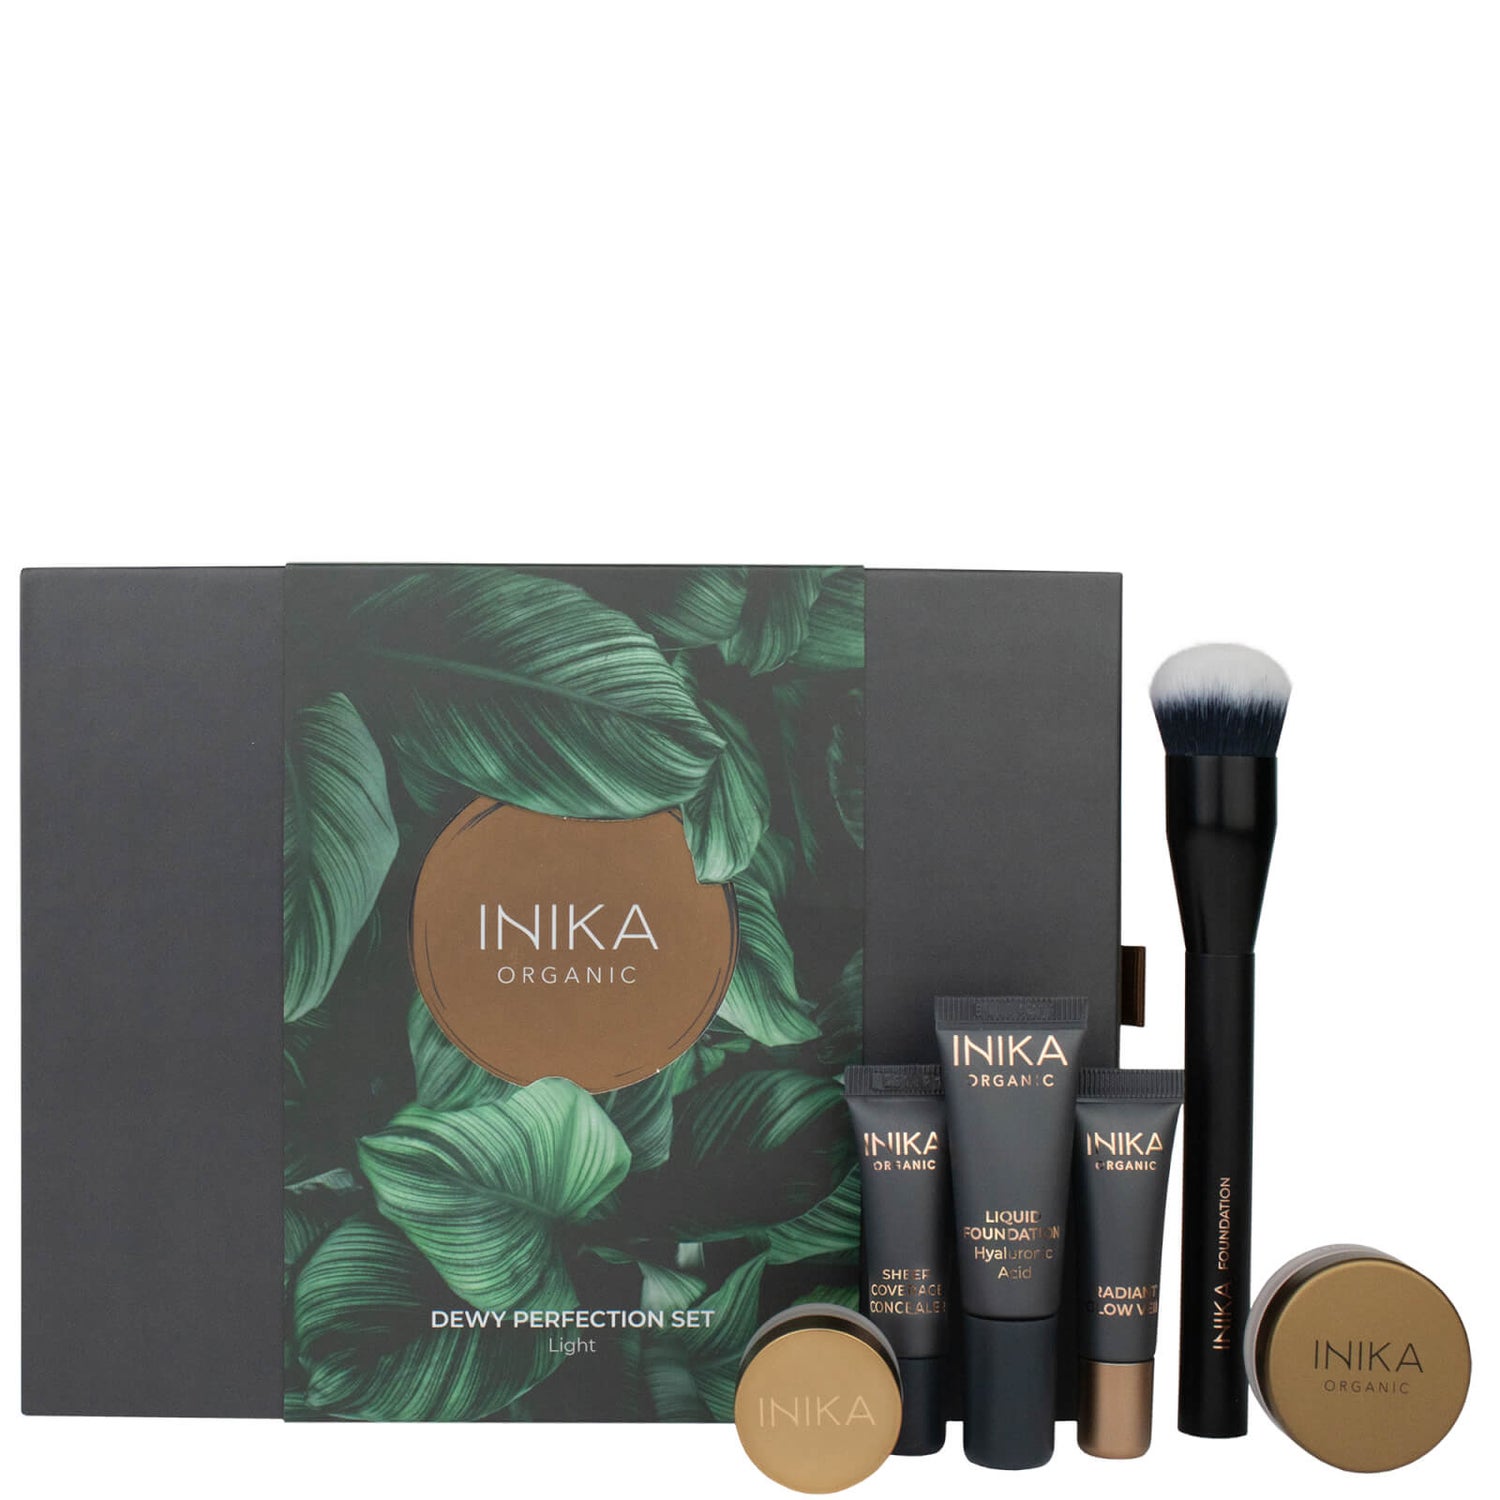 INIKA Dewy Perfection Set (Various Options) (Worth £78.00)